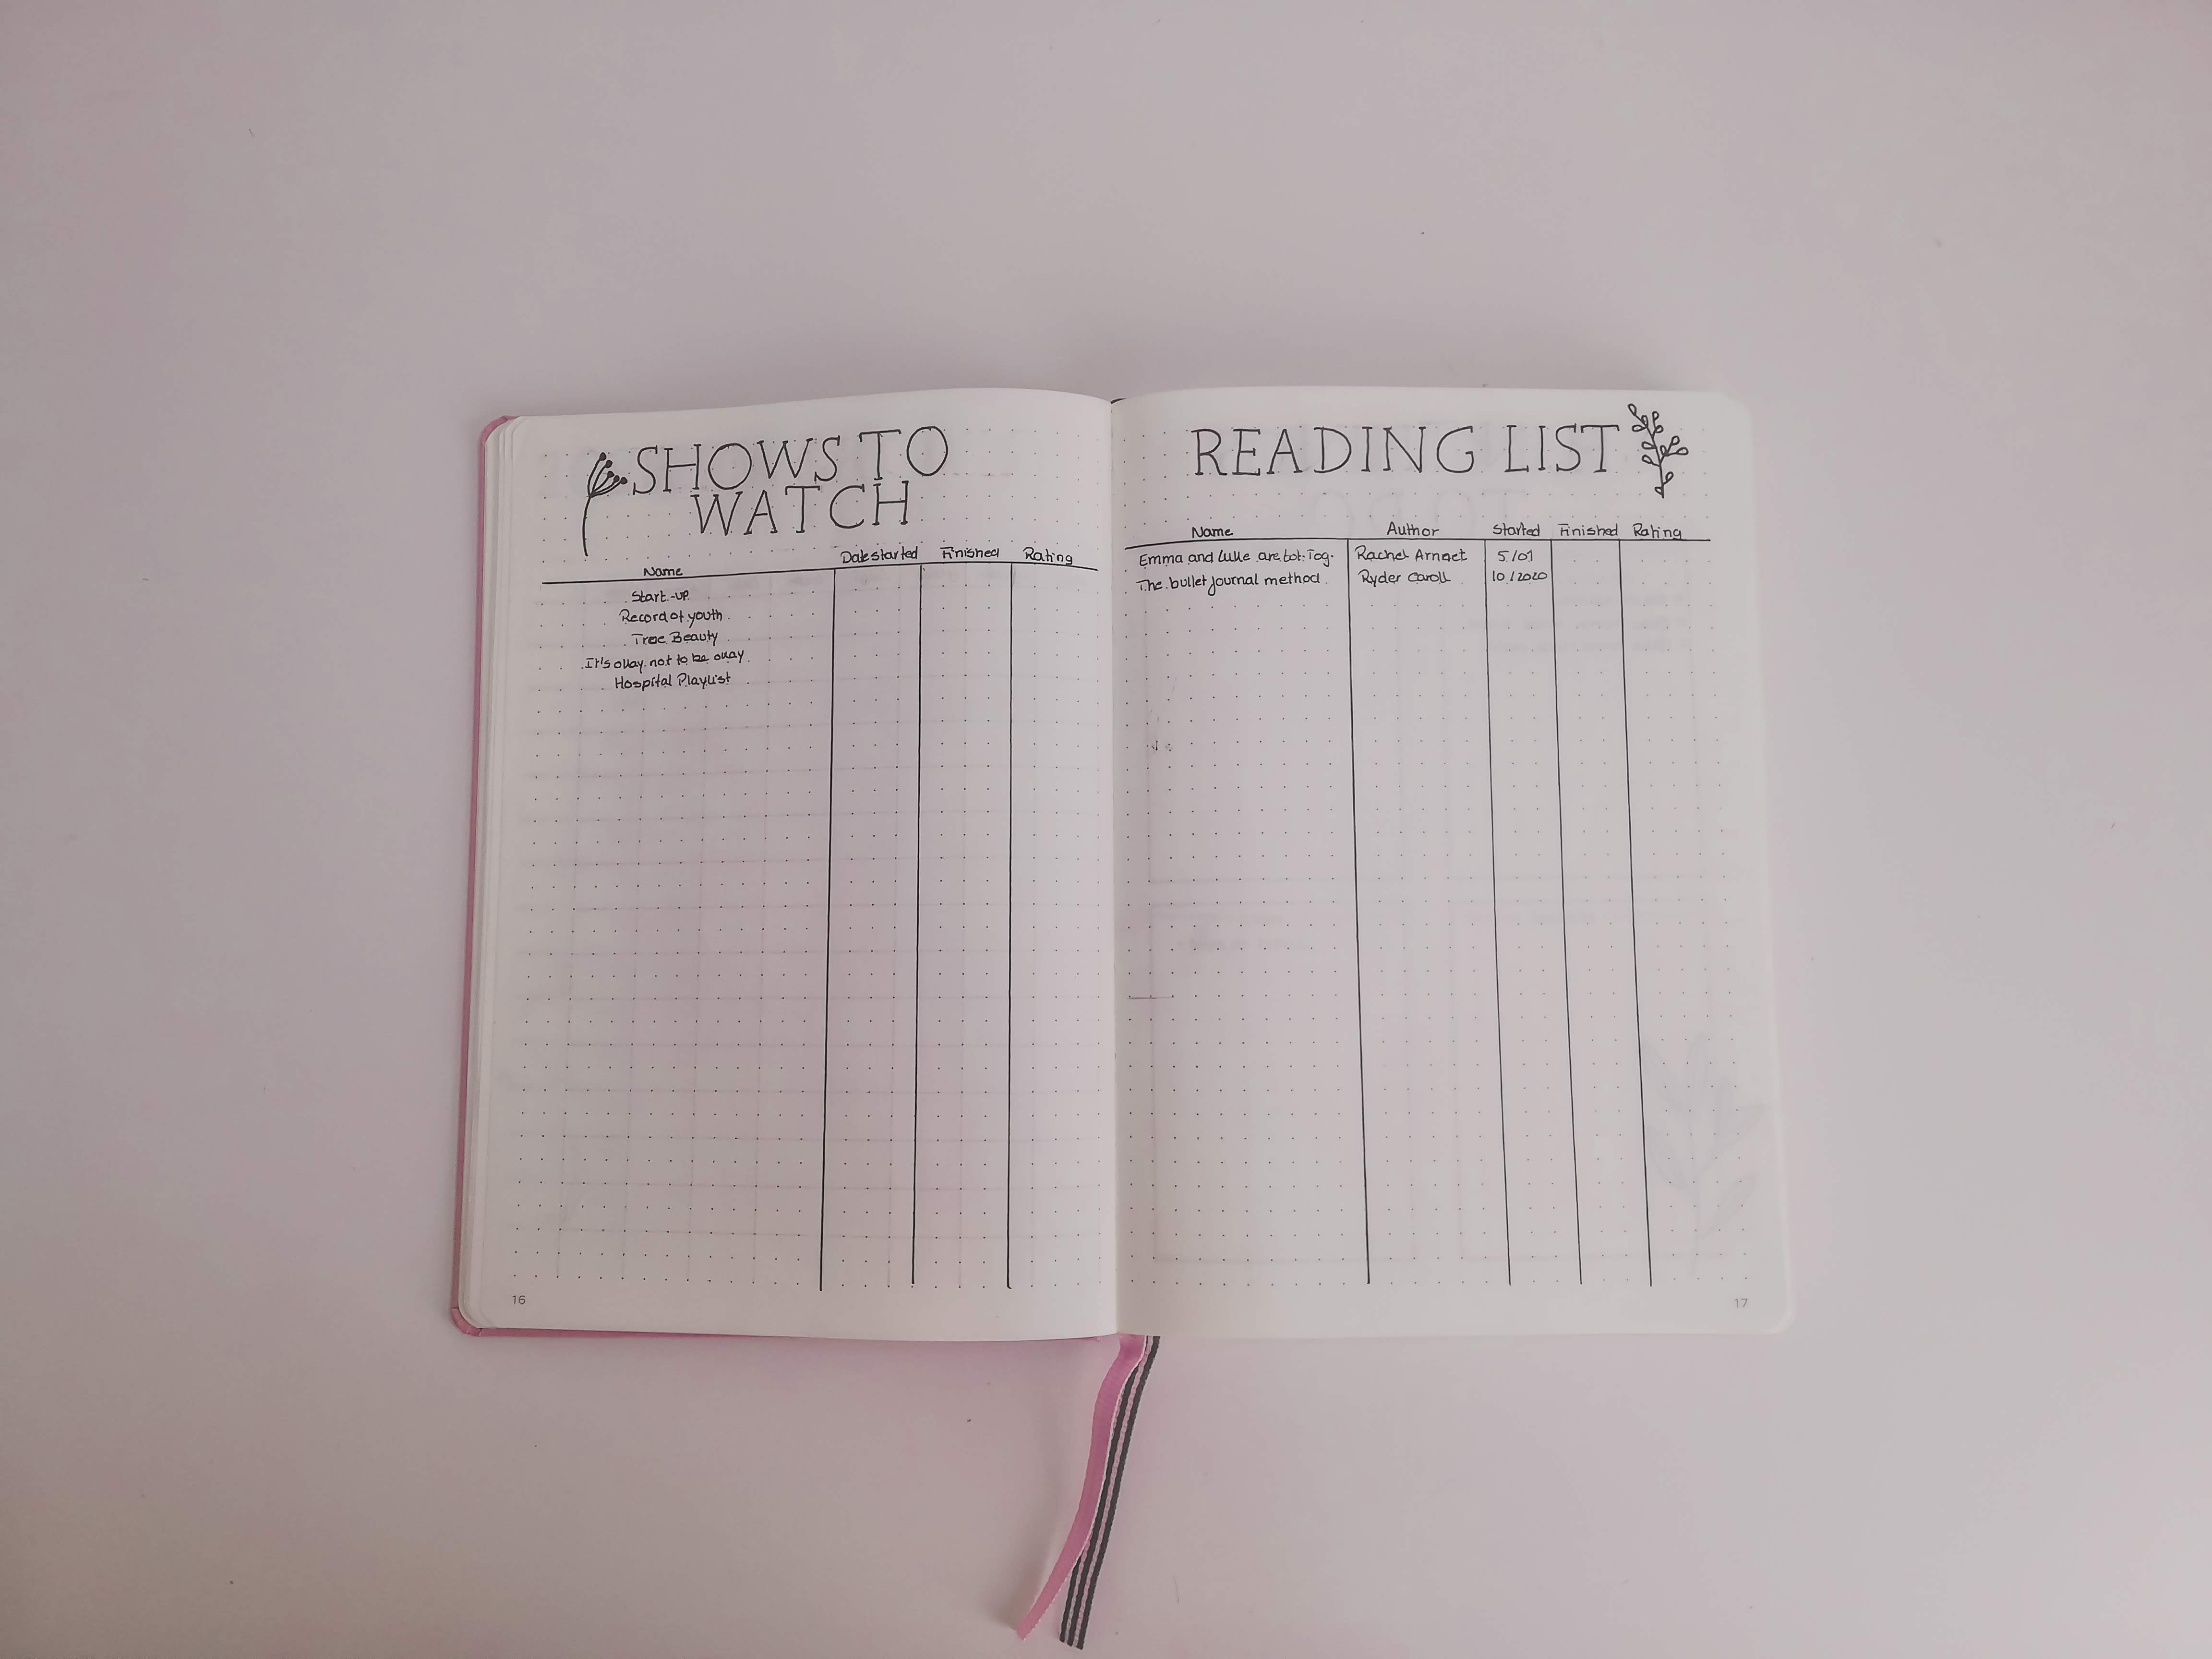 shows to watch + reading list - bullet journal setup 2021